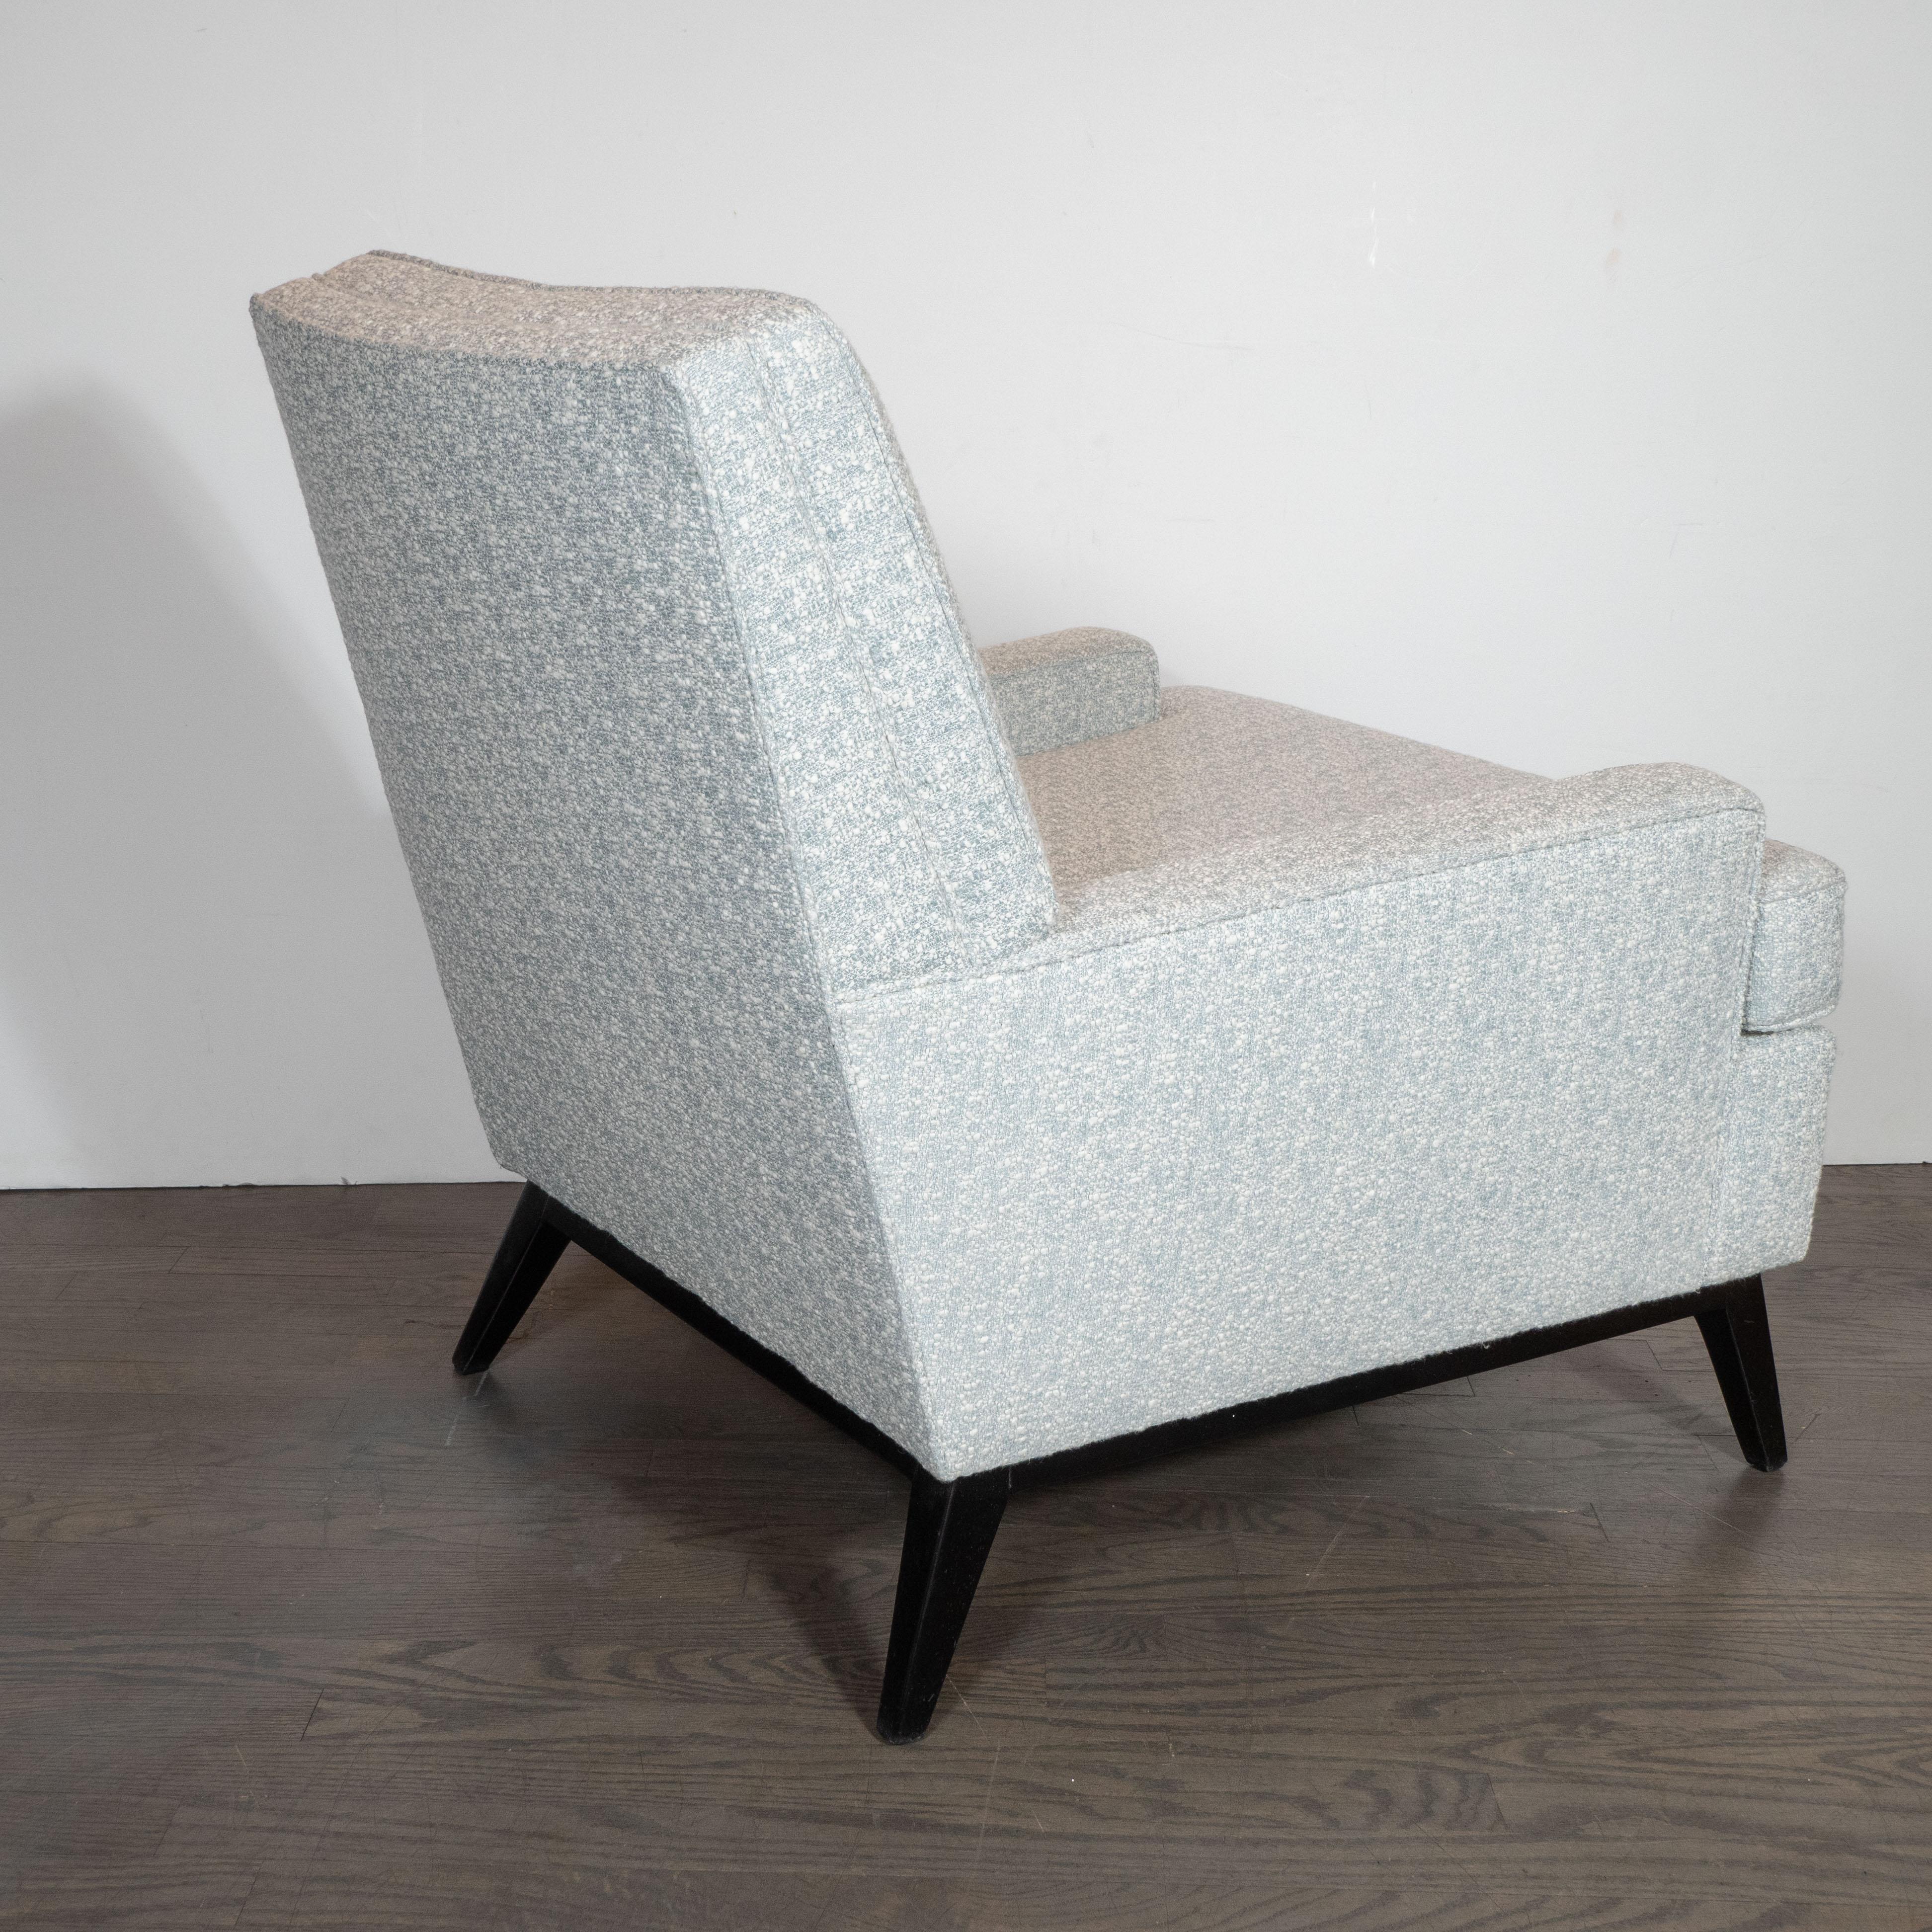 American Midcentury Modern Armchair and Ottoman in Sky Blue Upholstery by Paul McCobb